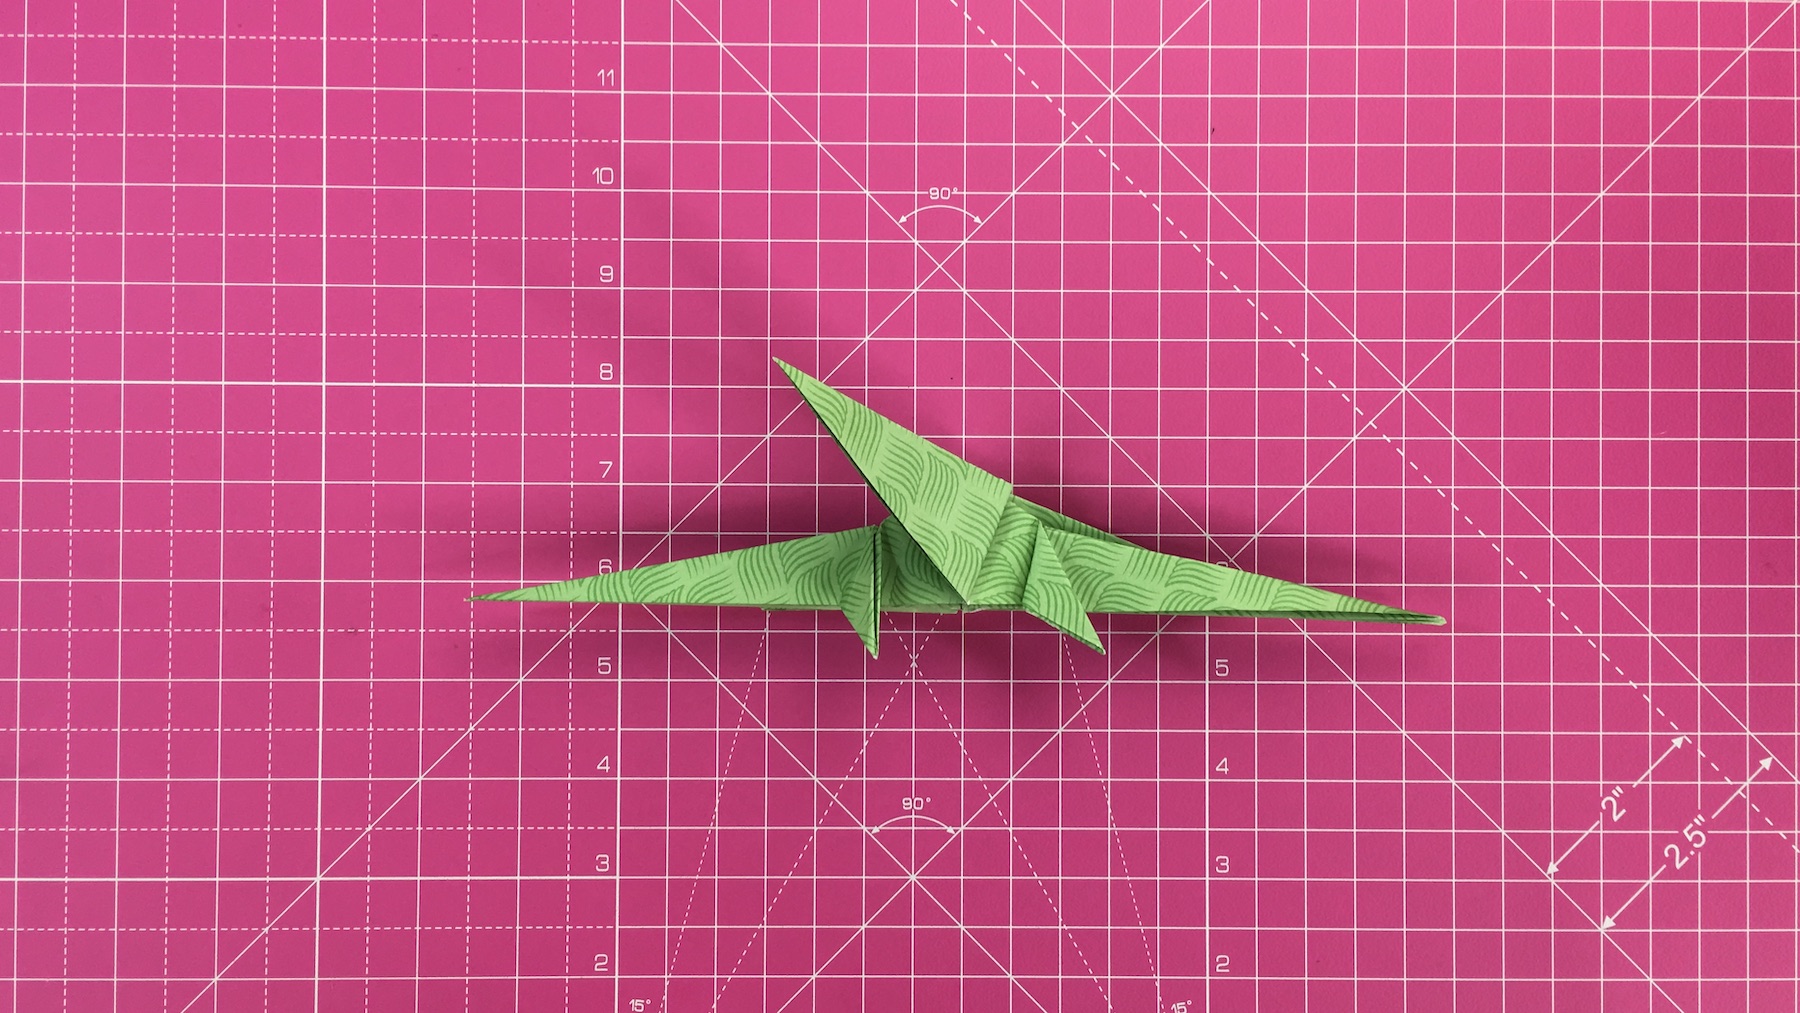 How to make an origami dragon, origami dragon tutorial - step 38